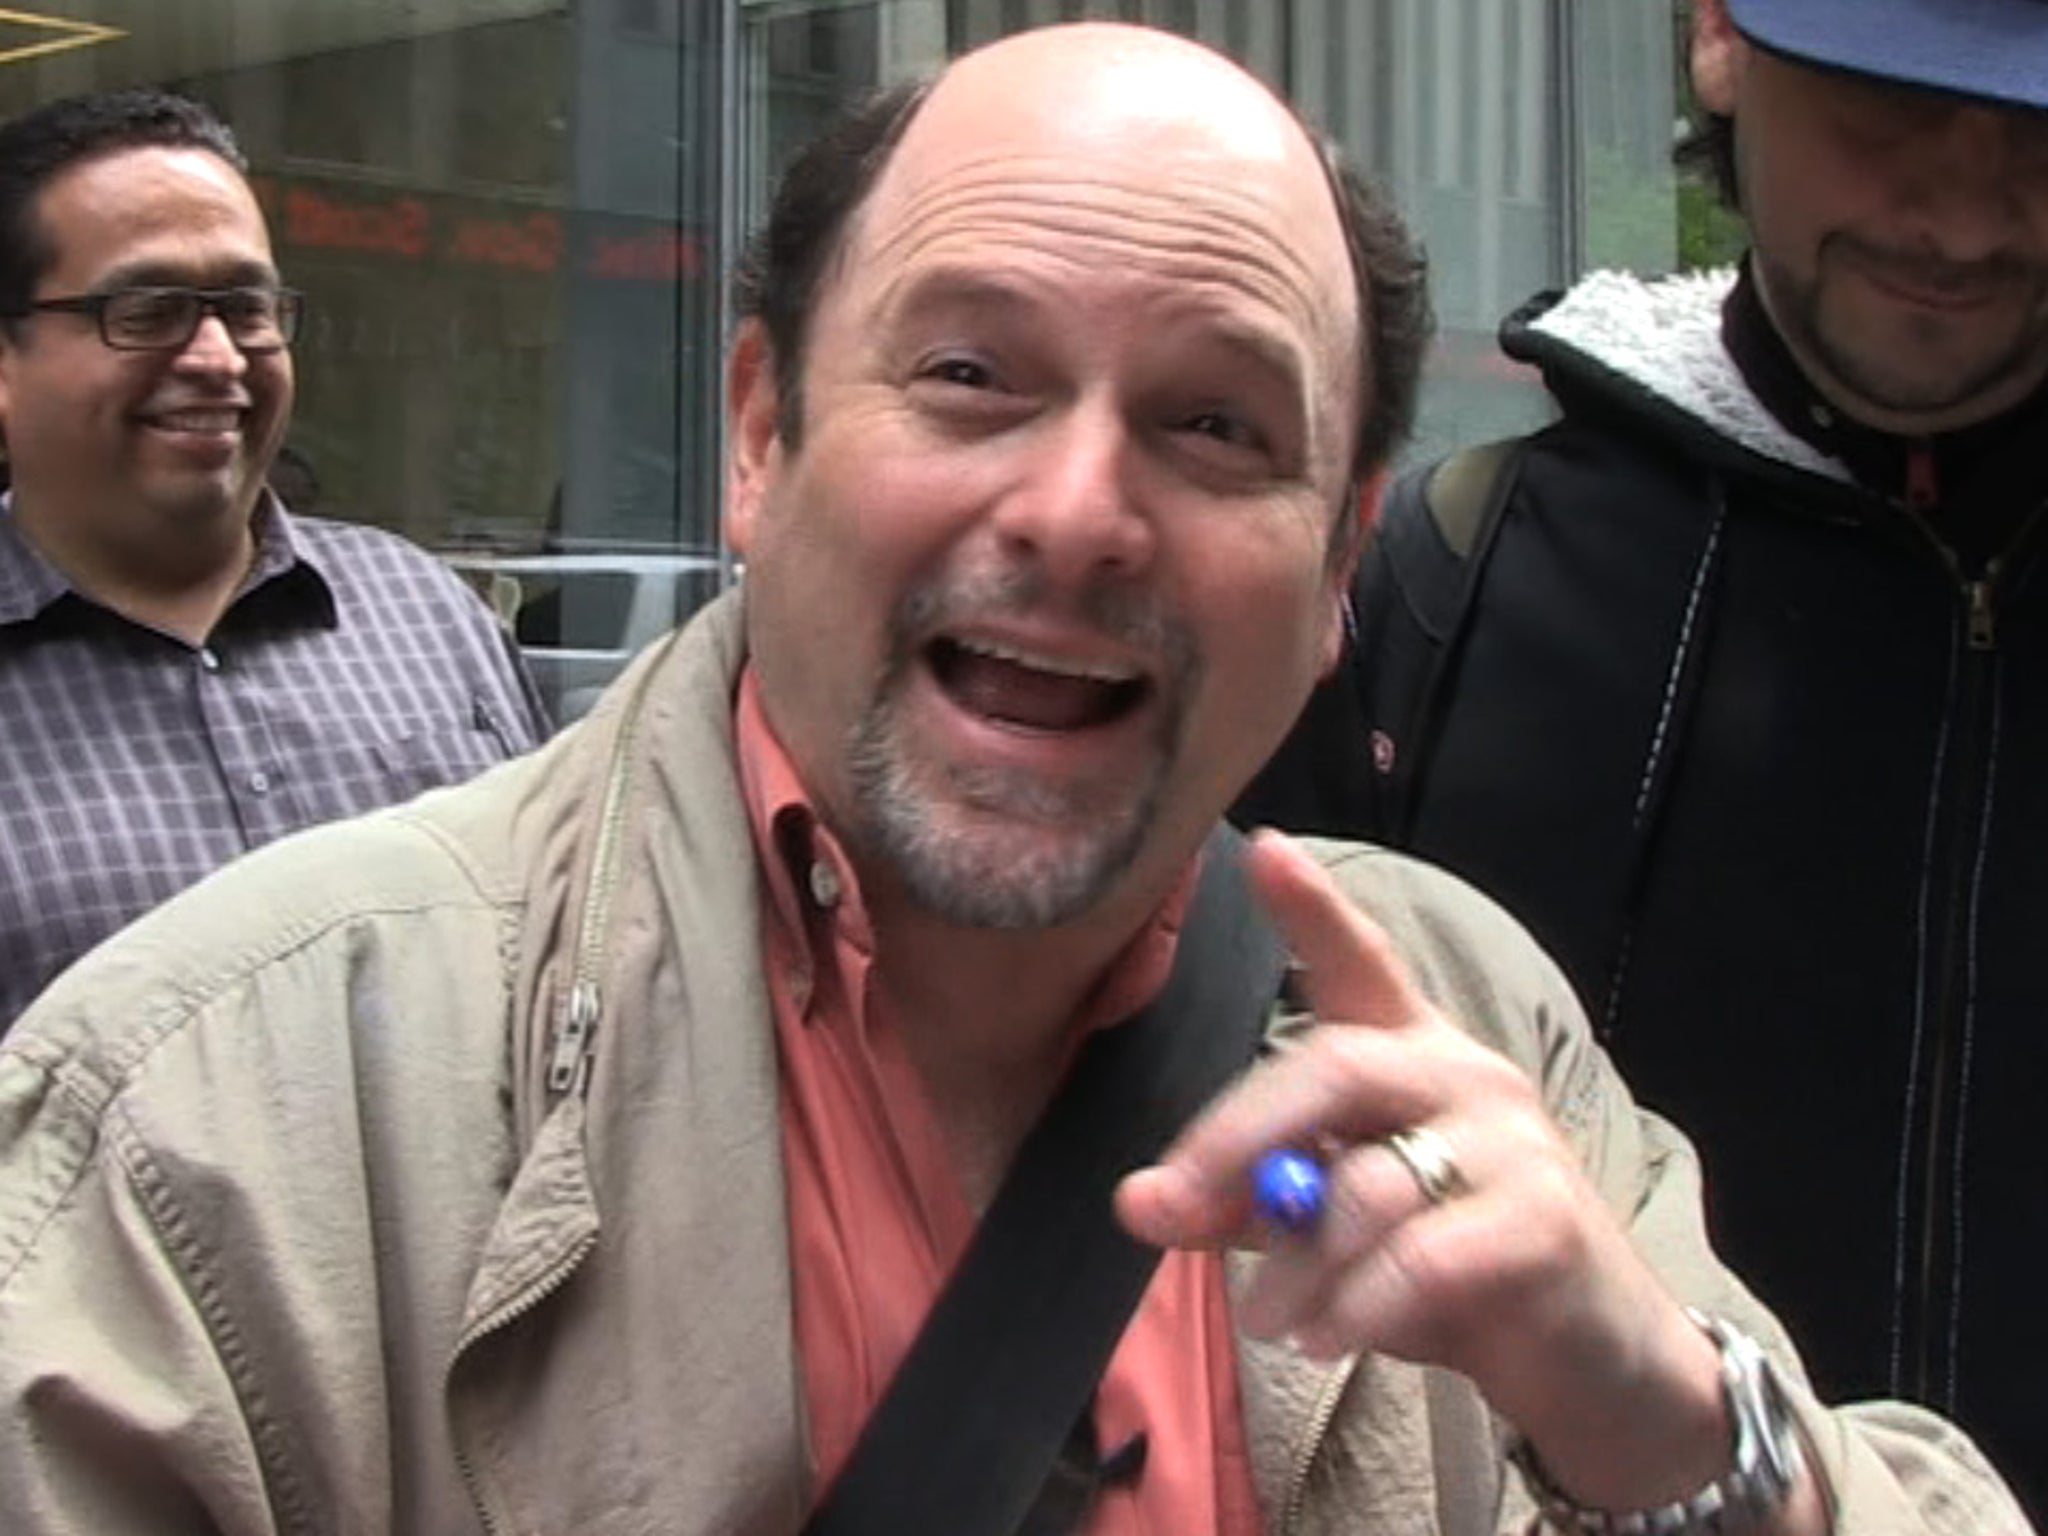 NY Yankees Cap Worn By Jason Alexander As George Costanza In